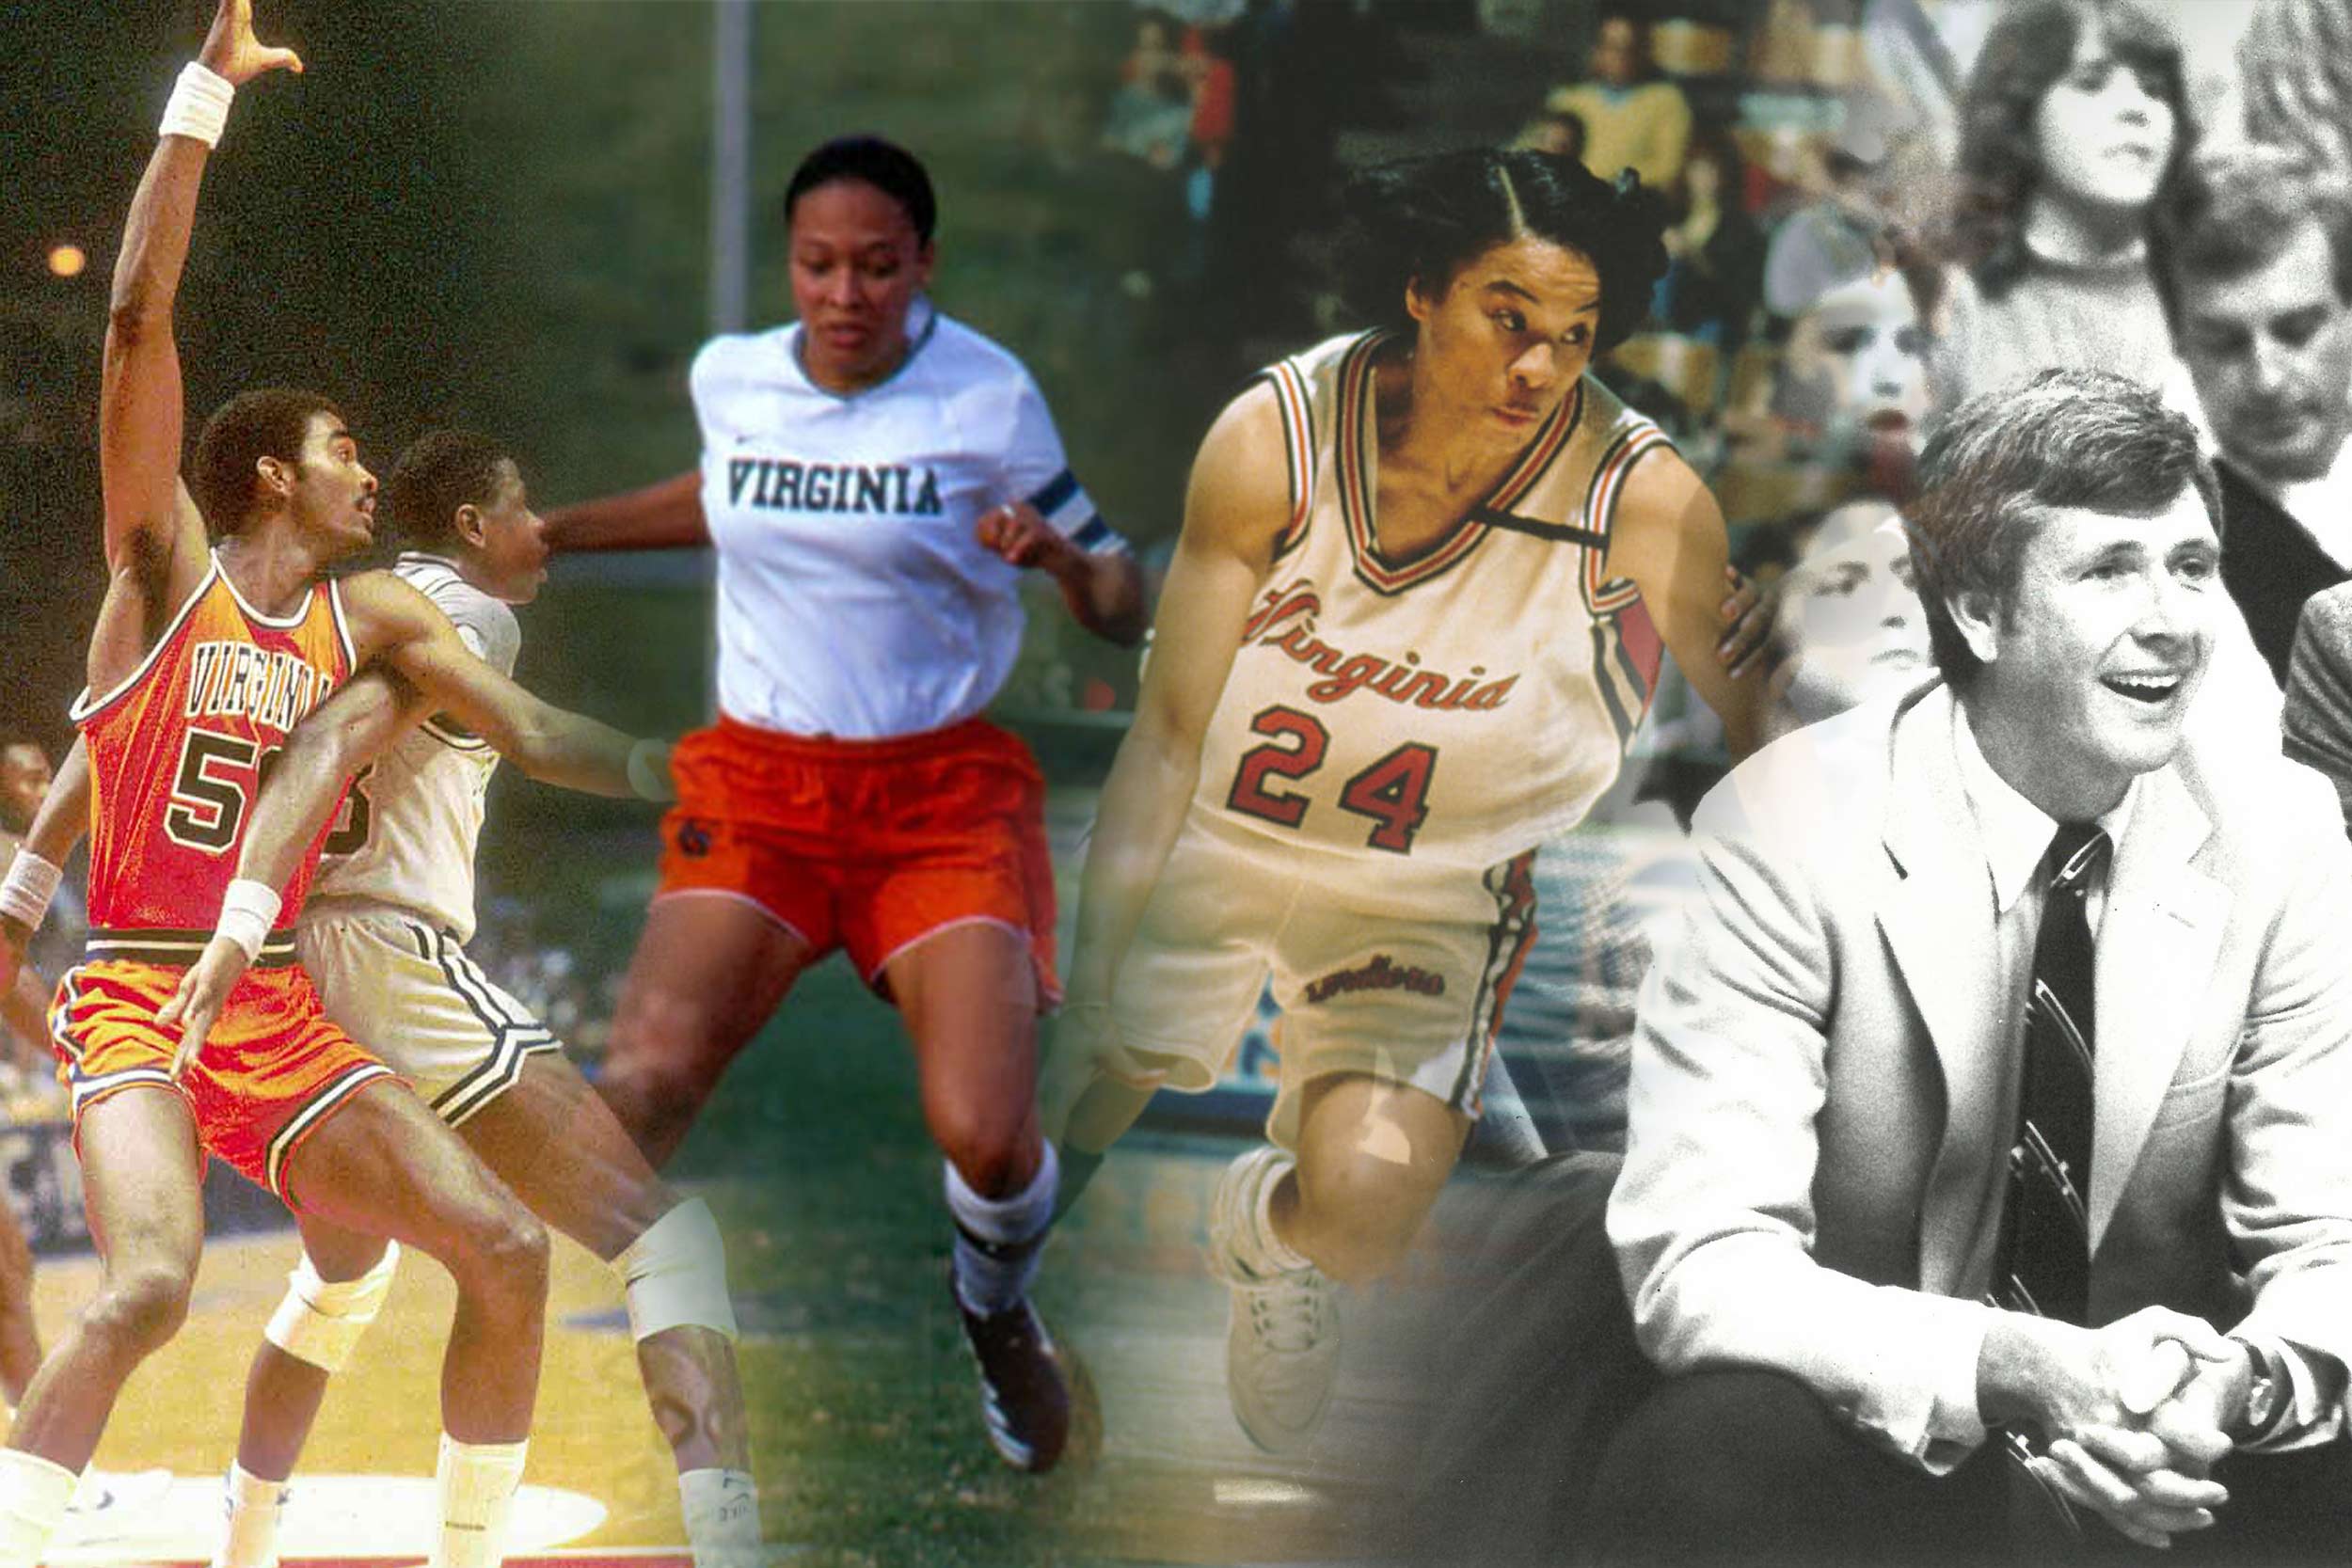 Blended collage of  UVA Athletes selected by ChatGPT